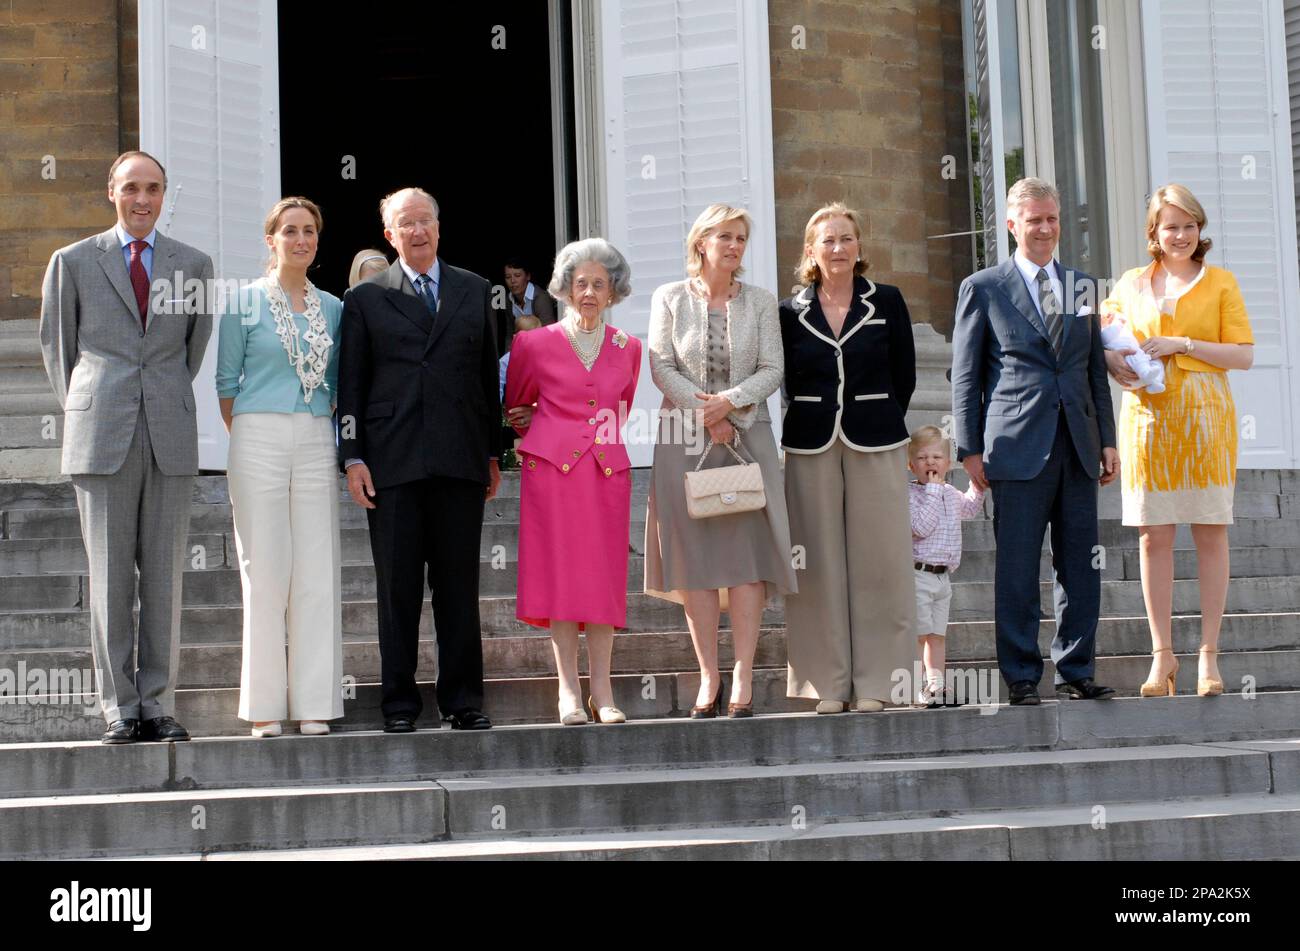 Queen Fabiola of Belgium, fourth from left, wife of former King Baudouin of Belgium, celebrates her 80th birthday, that takes place actually on June 11, along with the Belgium Royal Family during a gathering at the Royal Castle of Laeken outside Brussels, Tuesday June 3, 2008. From left to right: Prince Lorenz, Princess Claire, King Albert II, Queen Fabiola, Princess Astrid, Queen Paola, Crown Prince Philippe, Princess Mathilde. ( AP Photo/ Thierry Charlier.) Stockfoto